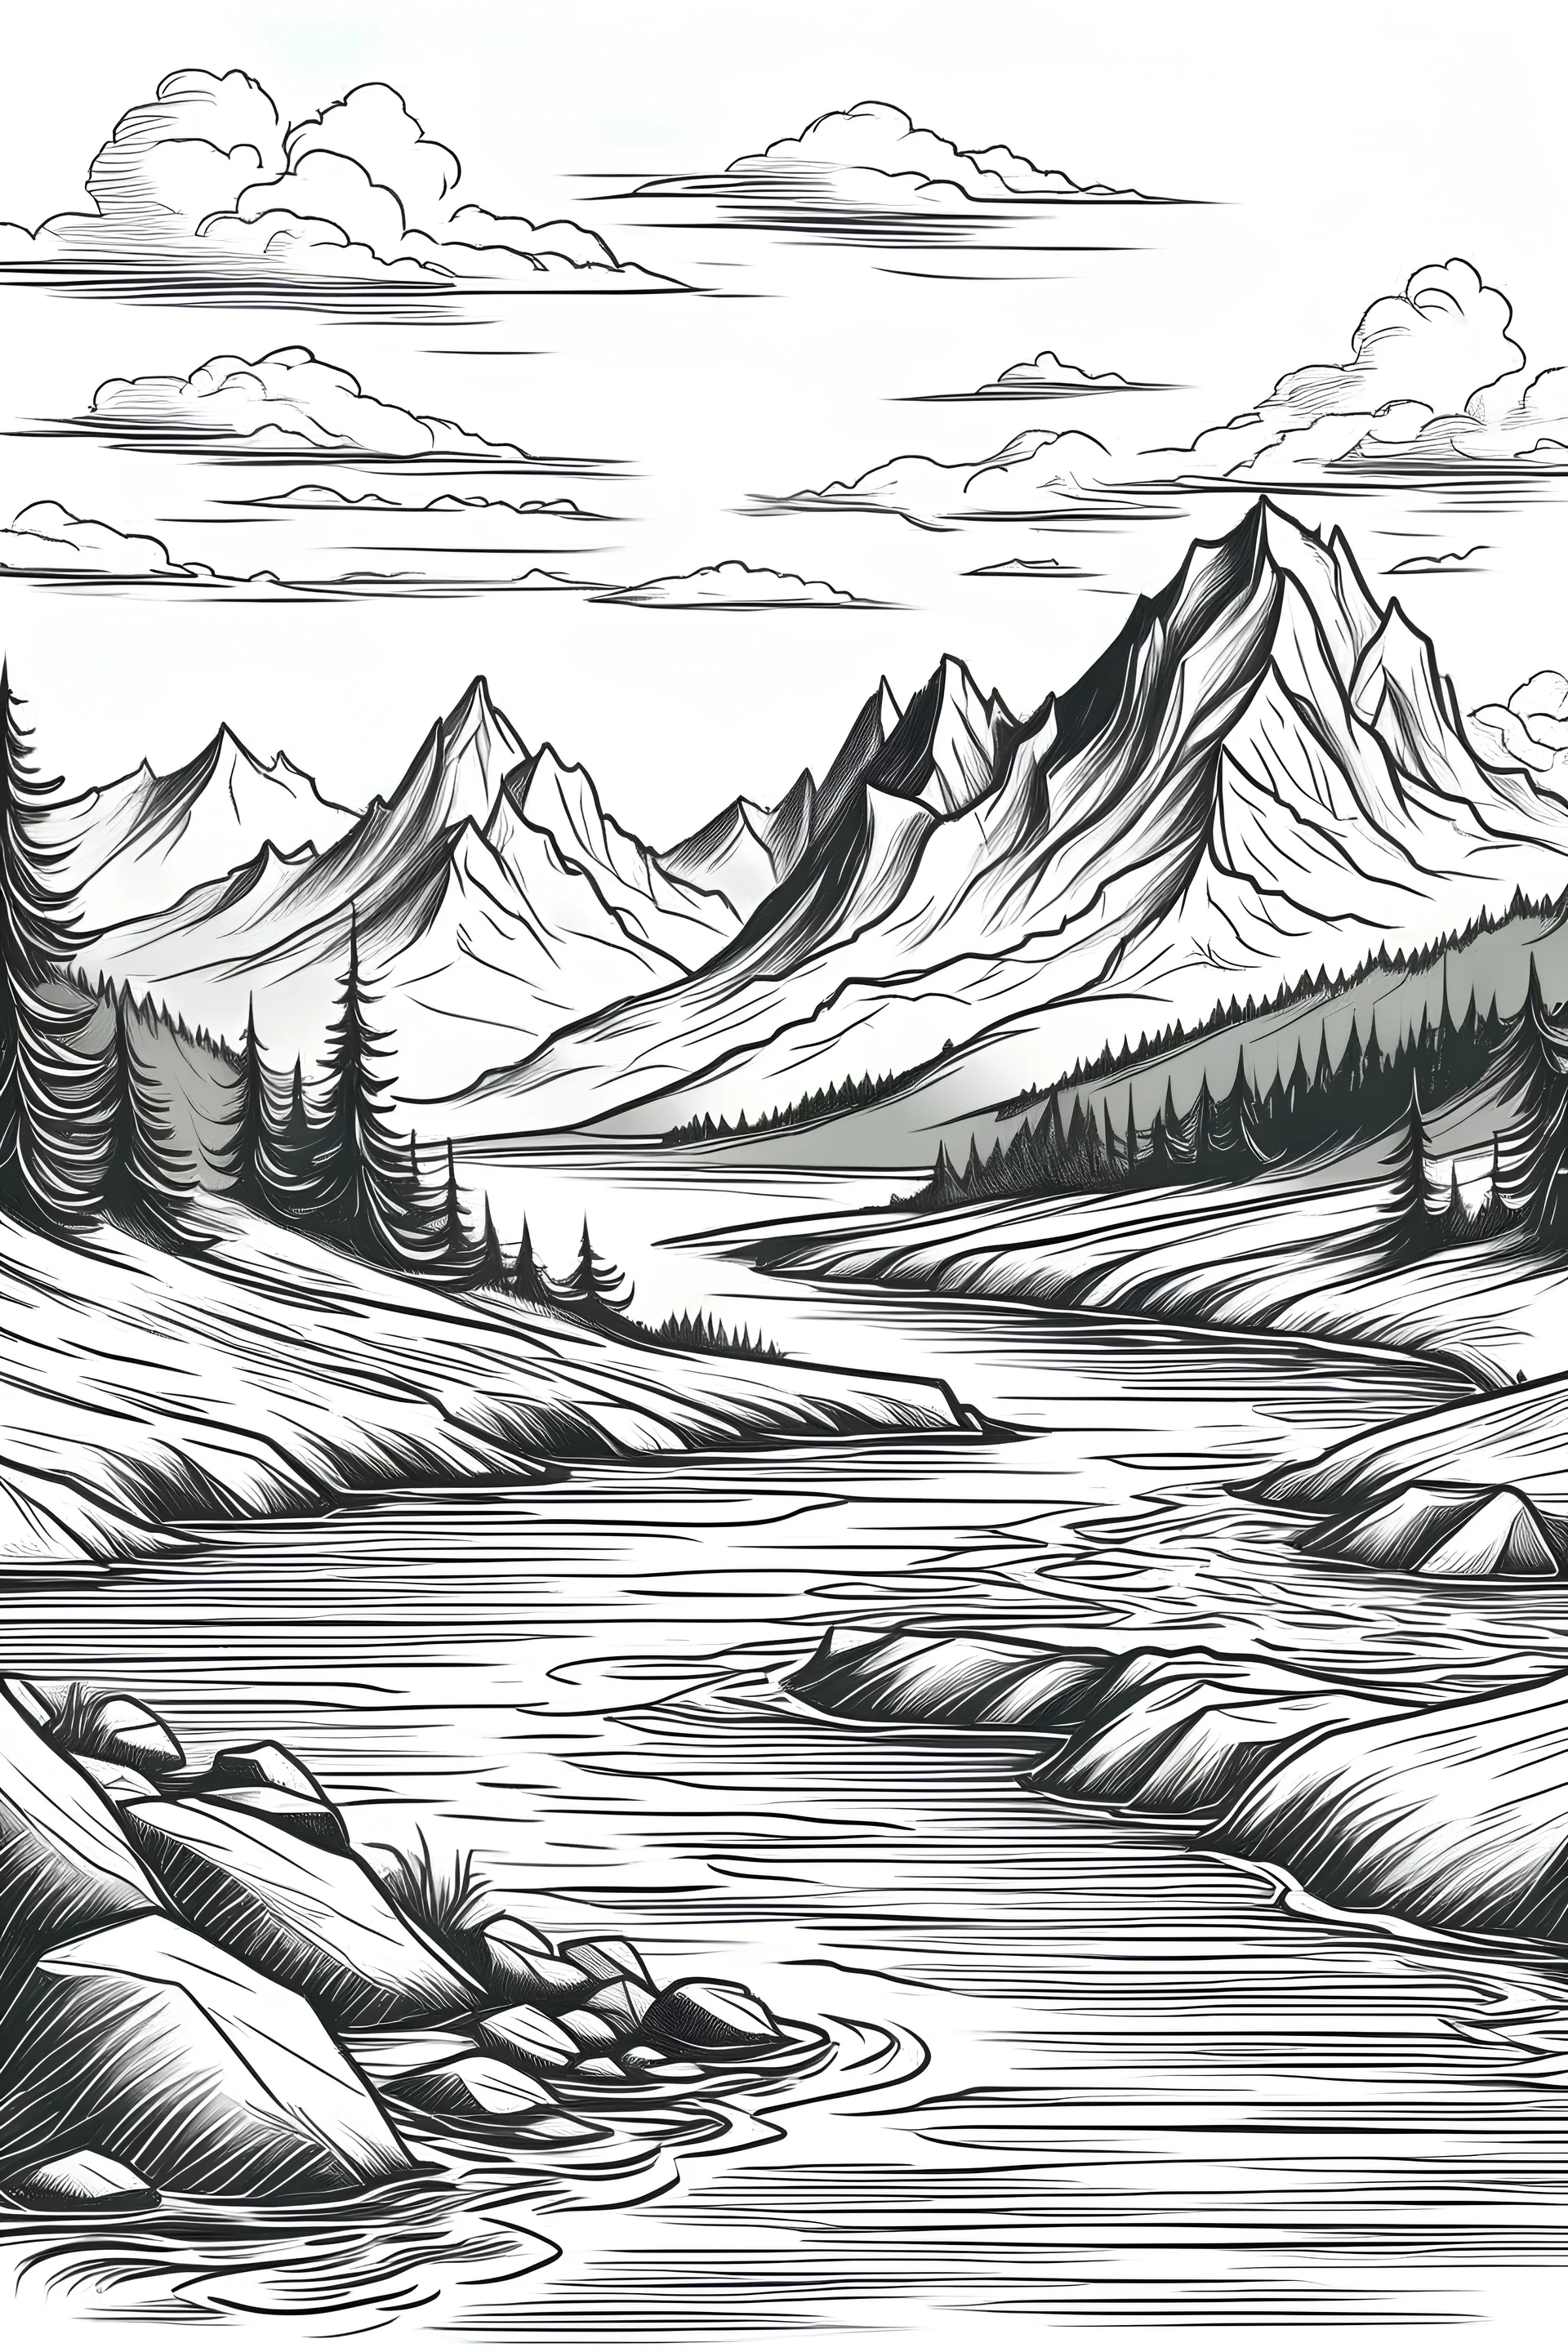 Mountain Landscape With River At Night. Black And White Ink Drawing,  Stylized Hand Drawn Sketch. Vector Illustration. Royalty Free SVG,  Cliparts, Vectors, and Stock Illustration. Image 118460259.